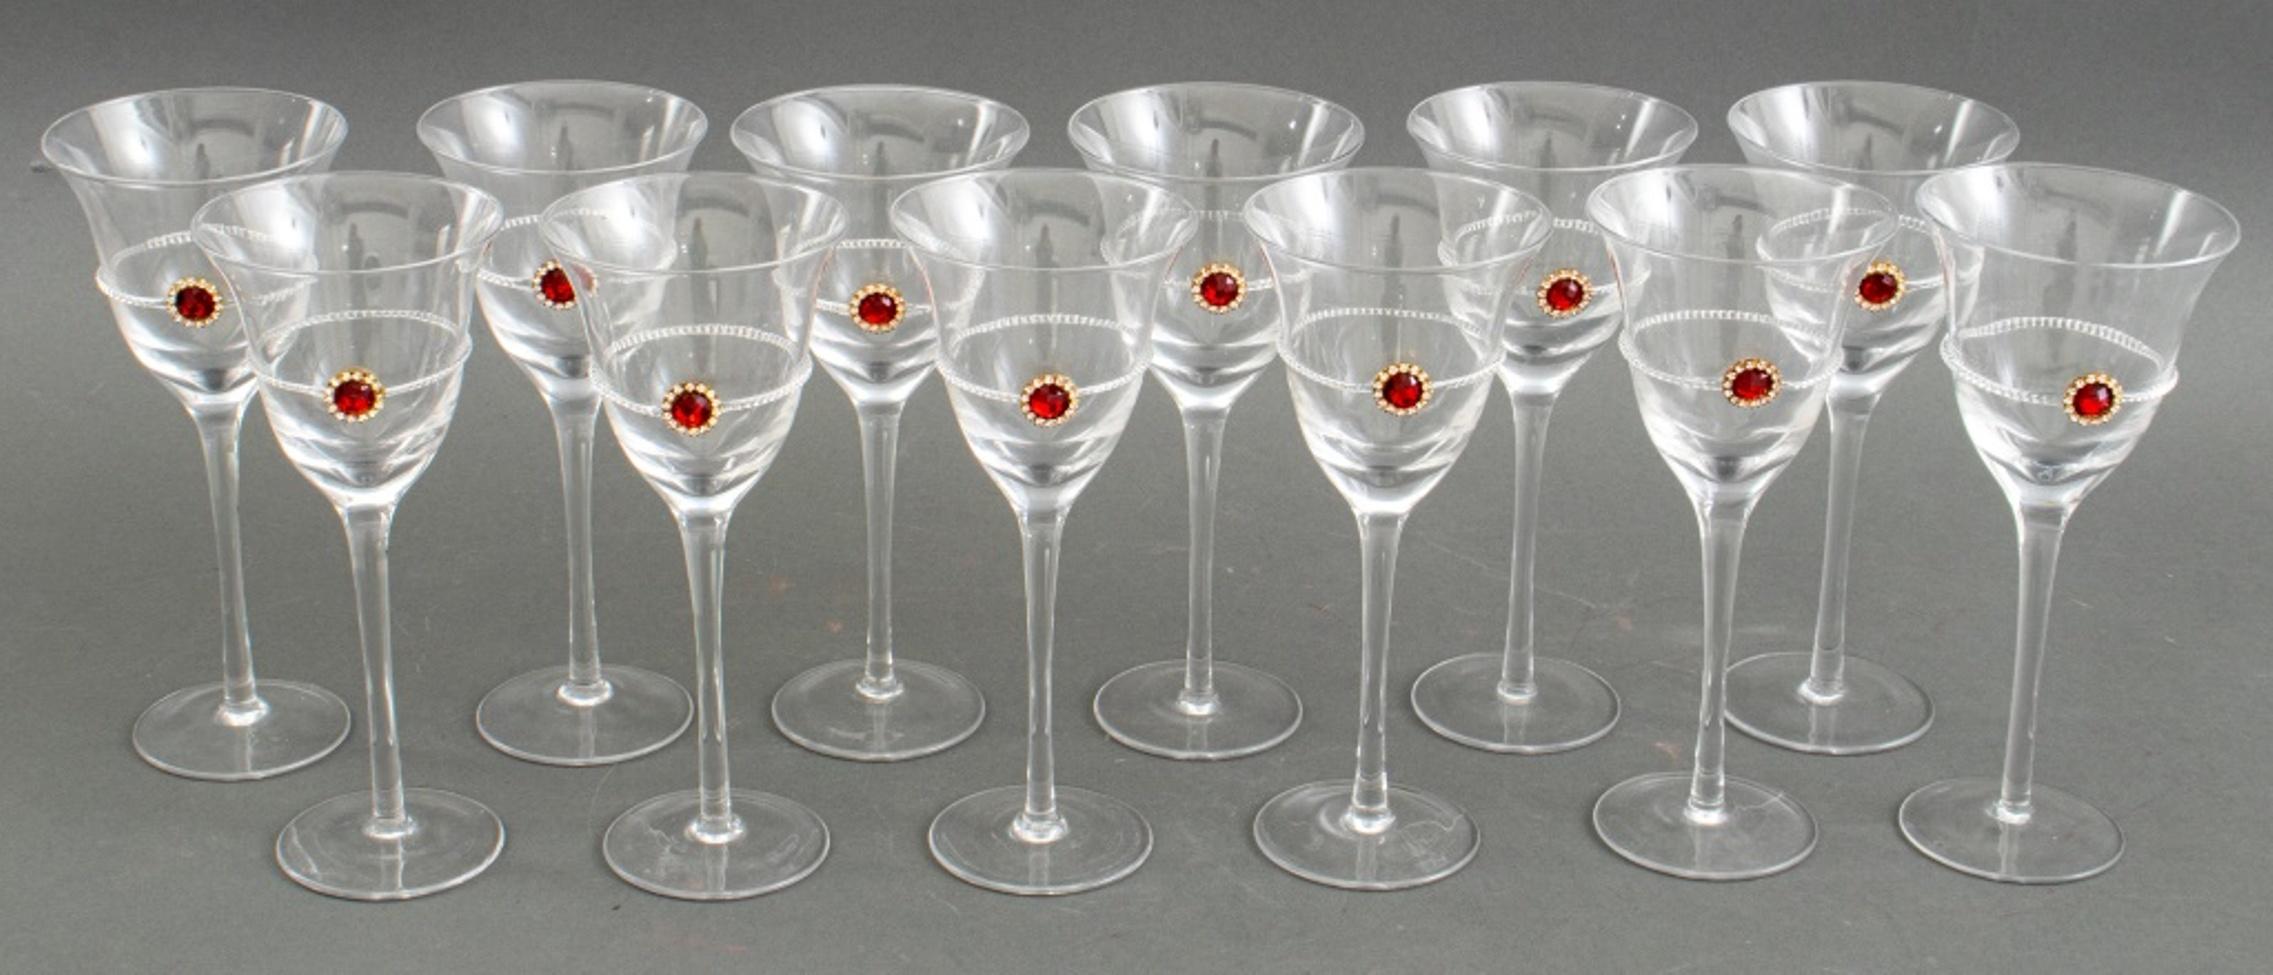 Set of (12) twelve Rococo Revival wine glasses with faux ruby and faux diamond decoration, apparently unsigned.

Dimensions: 8.75